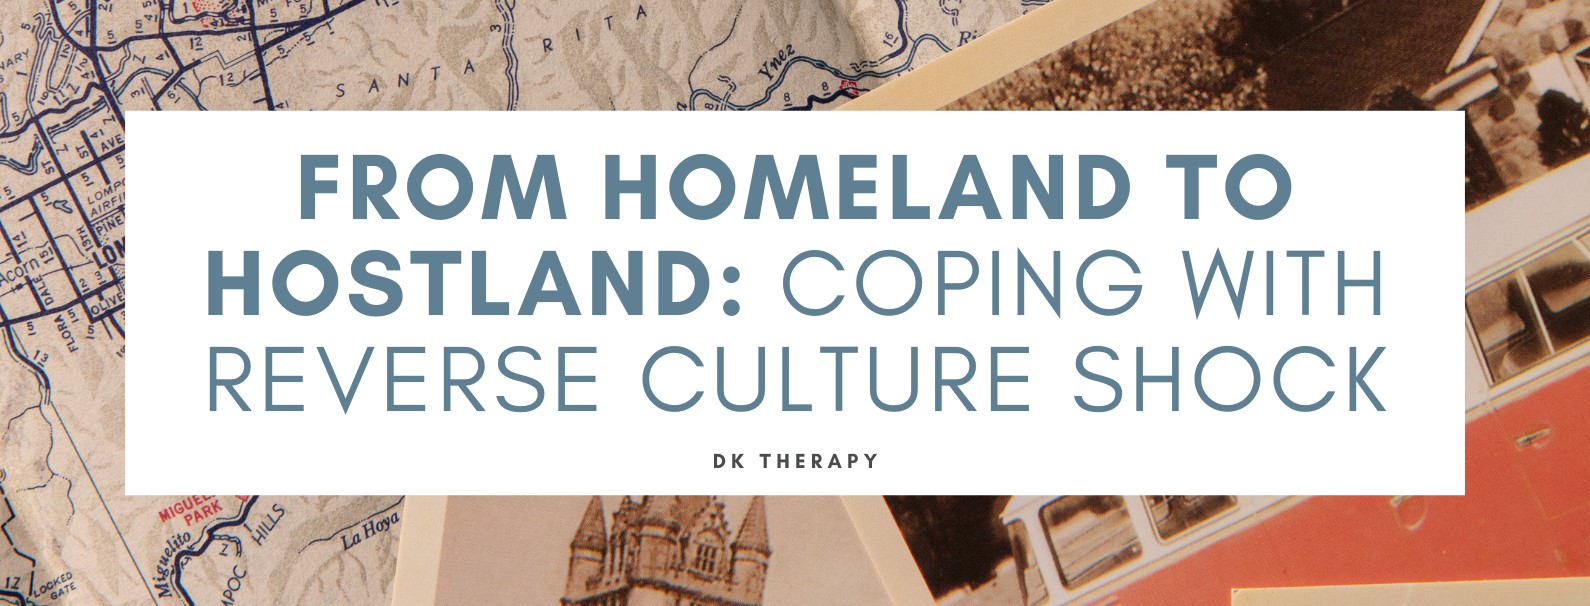 From Homeland to Hostland: Coping with Reverse Culture Shock